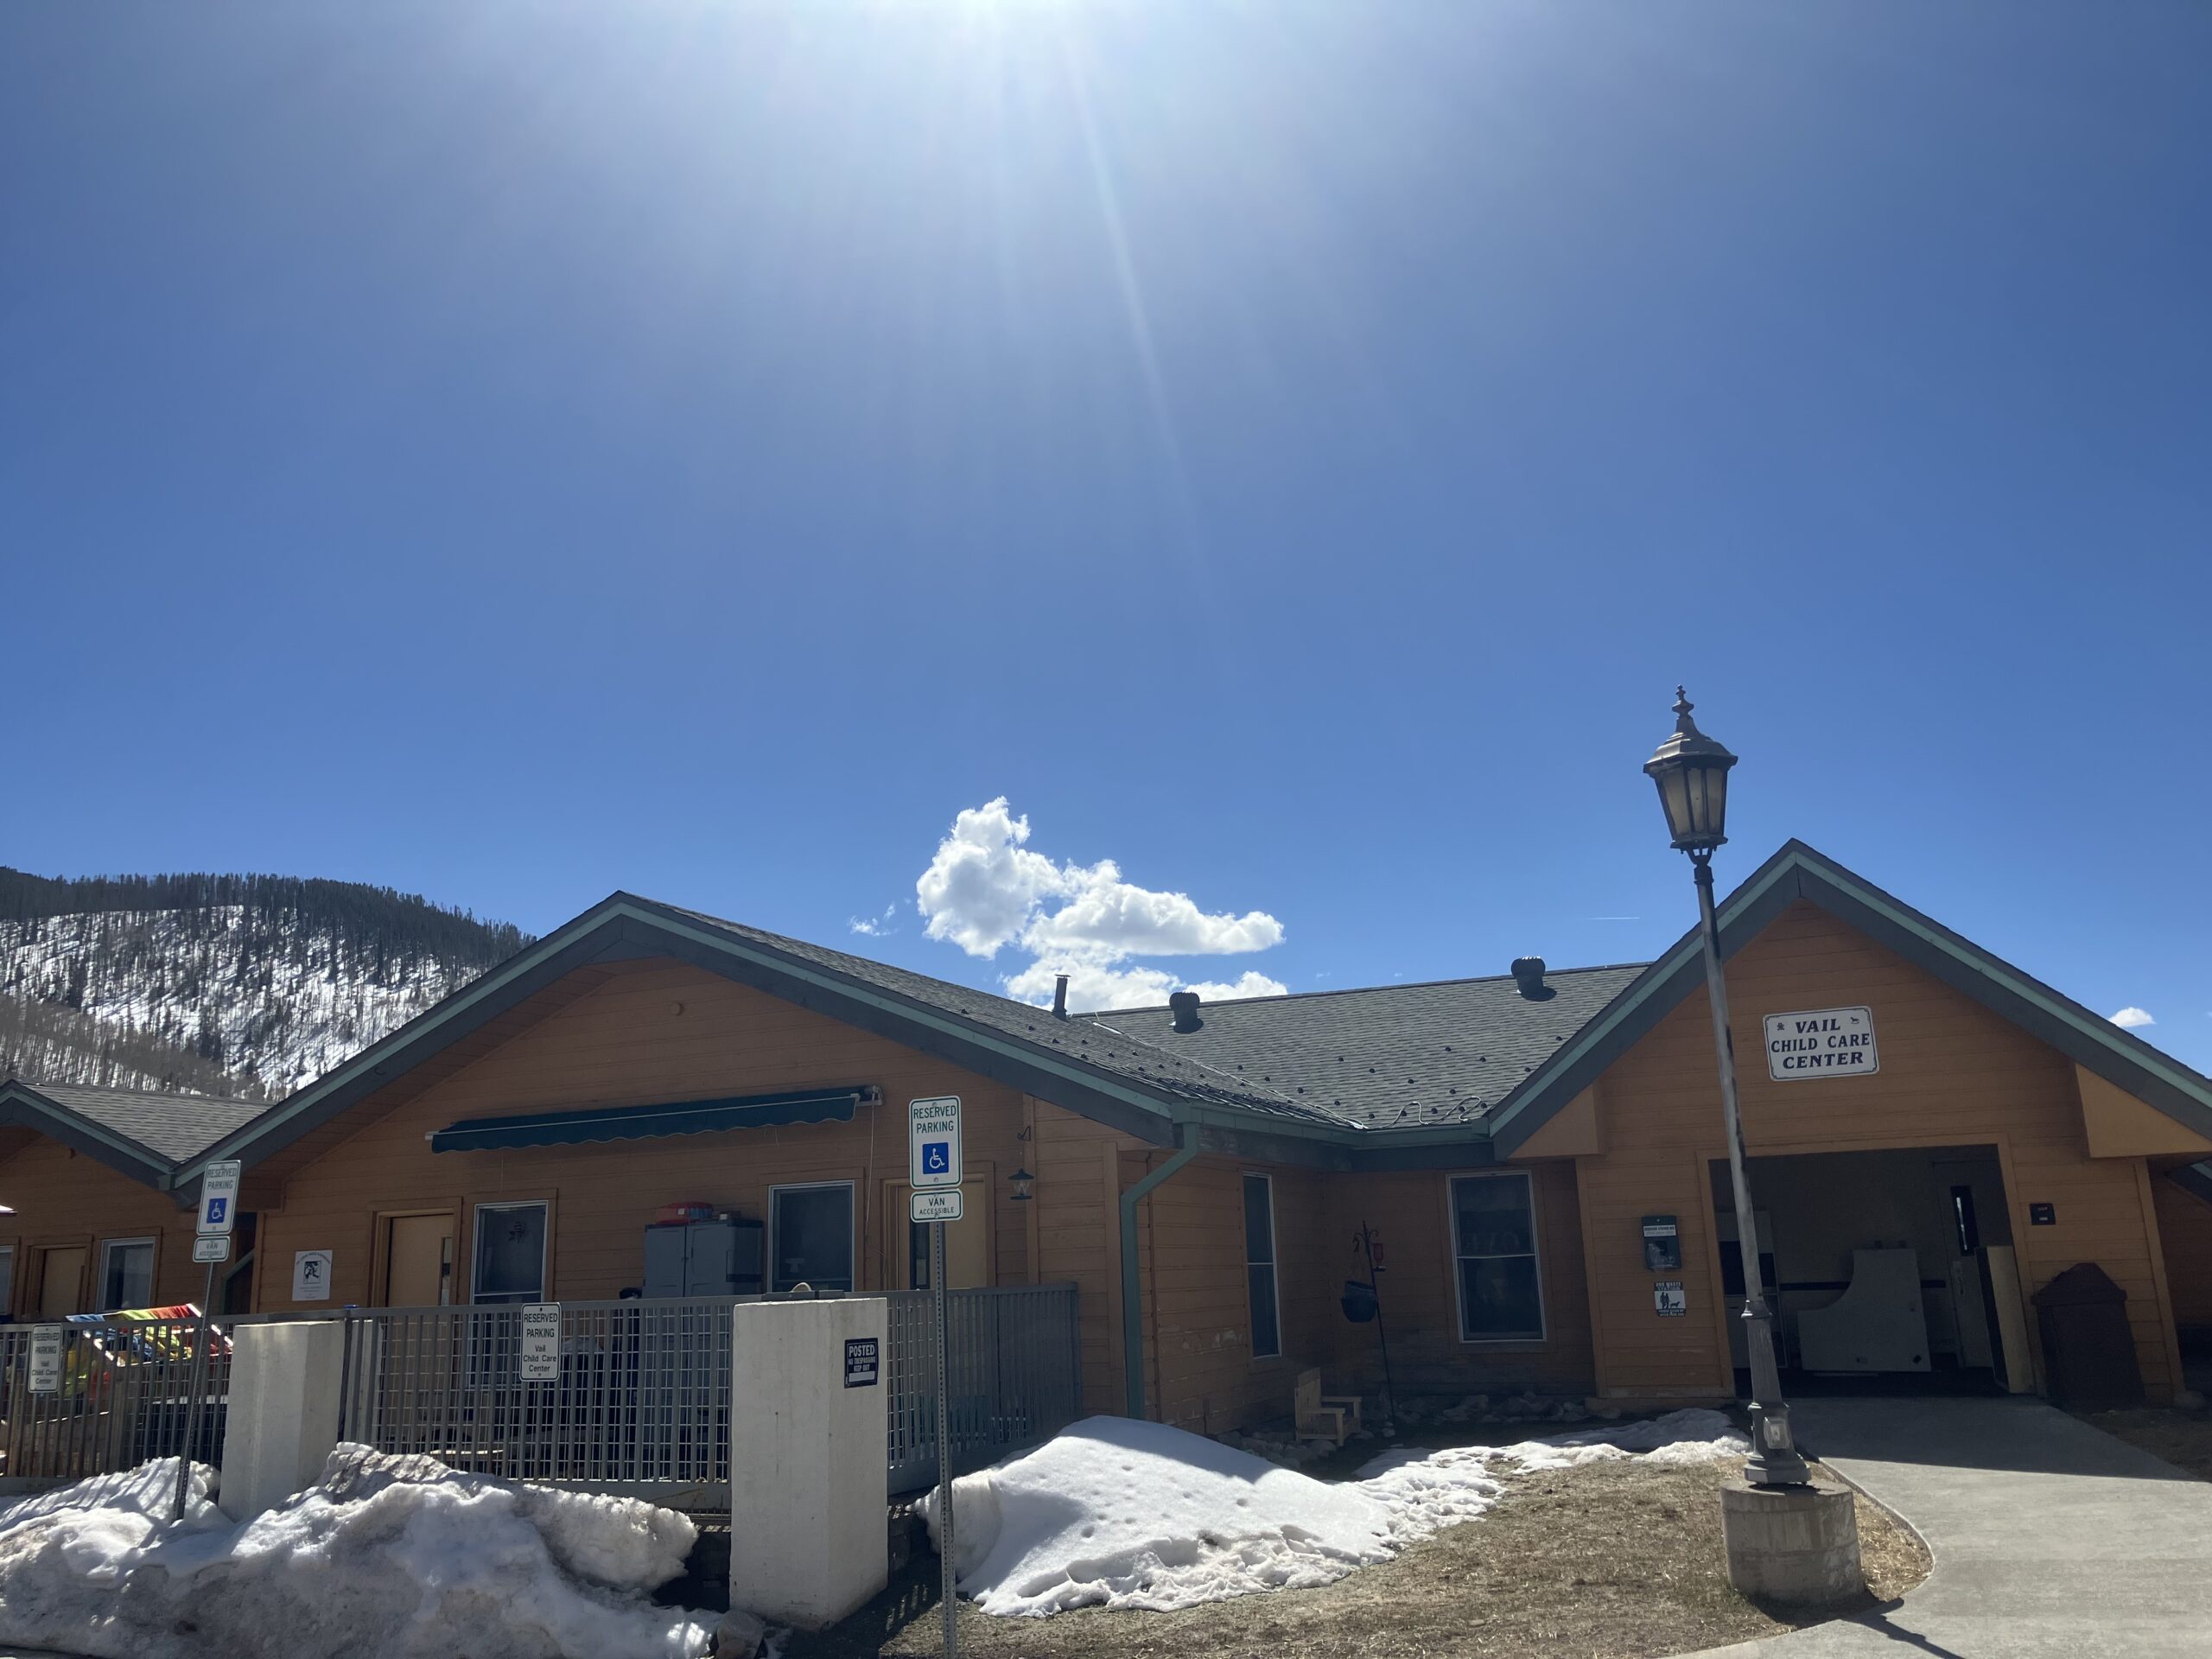 Vail Child Care Center on a sunny winter day